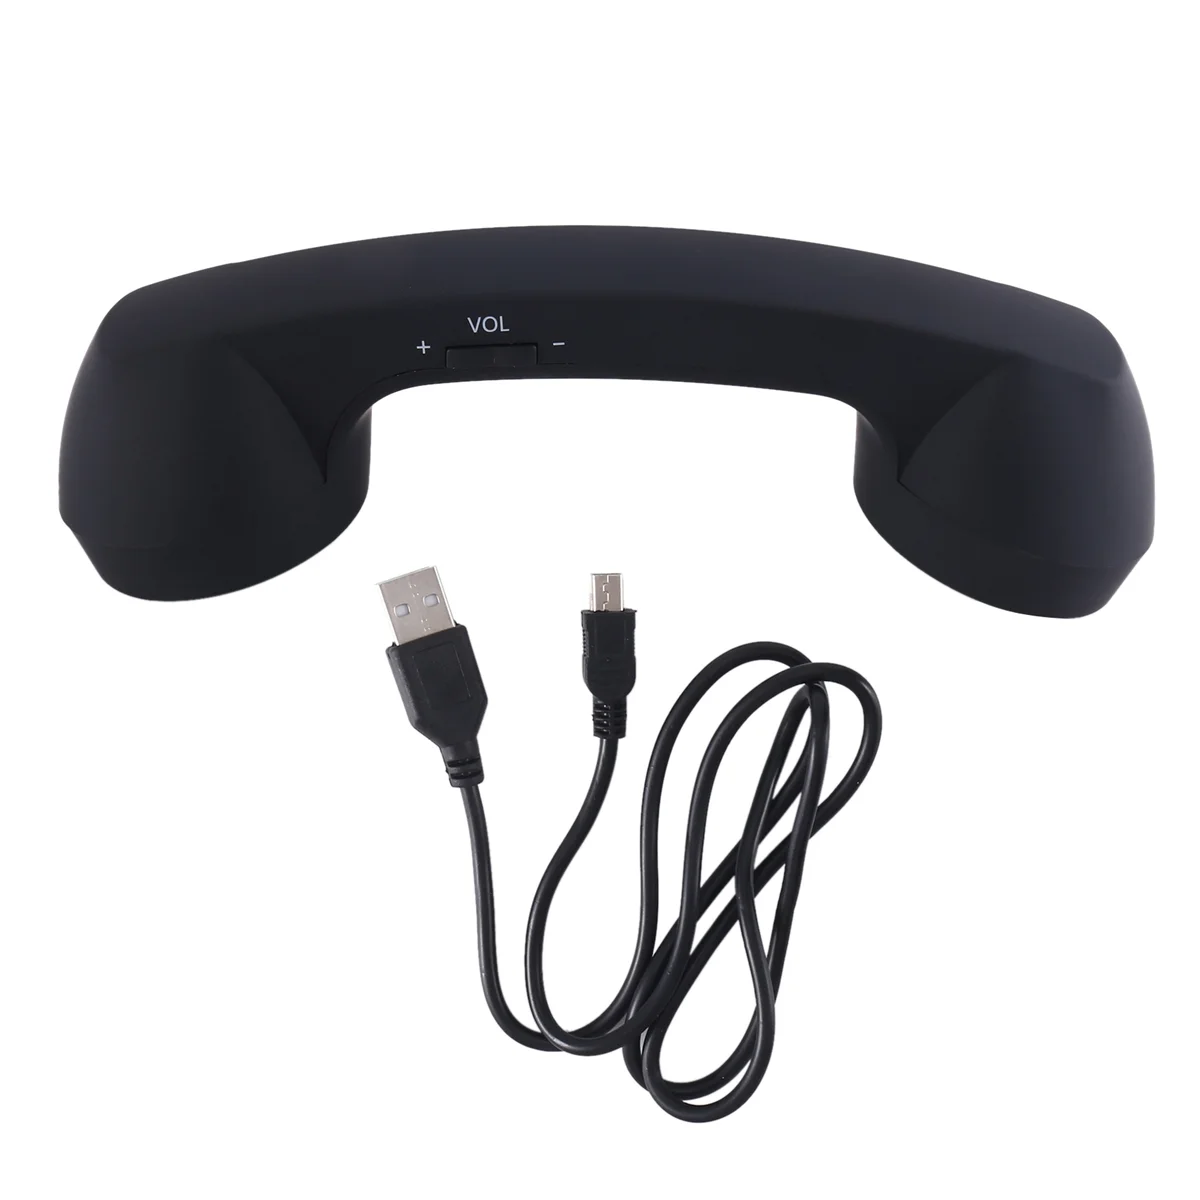 

Wireless Retro Telephone Handset and Wired Phone Handset Receivers Headphones for Mobile Phone